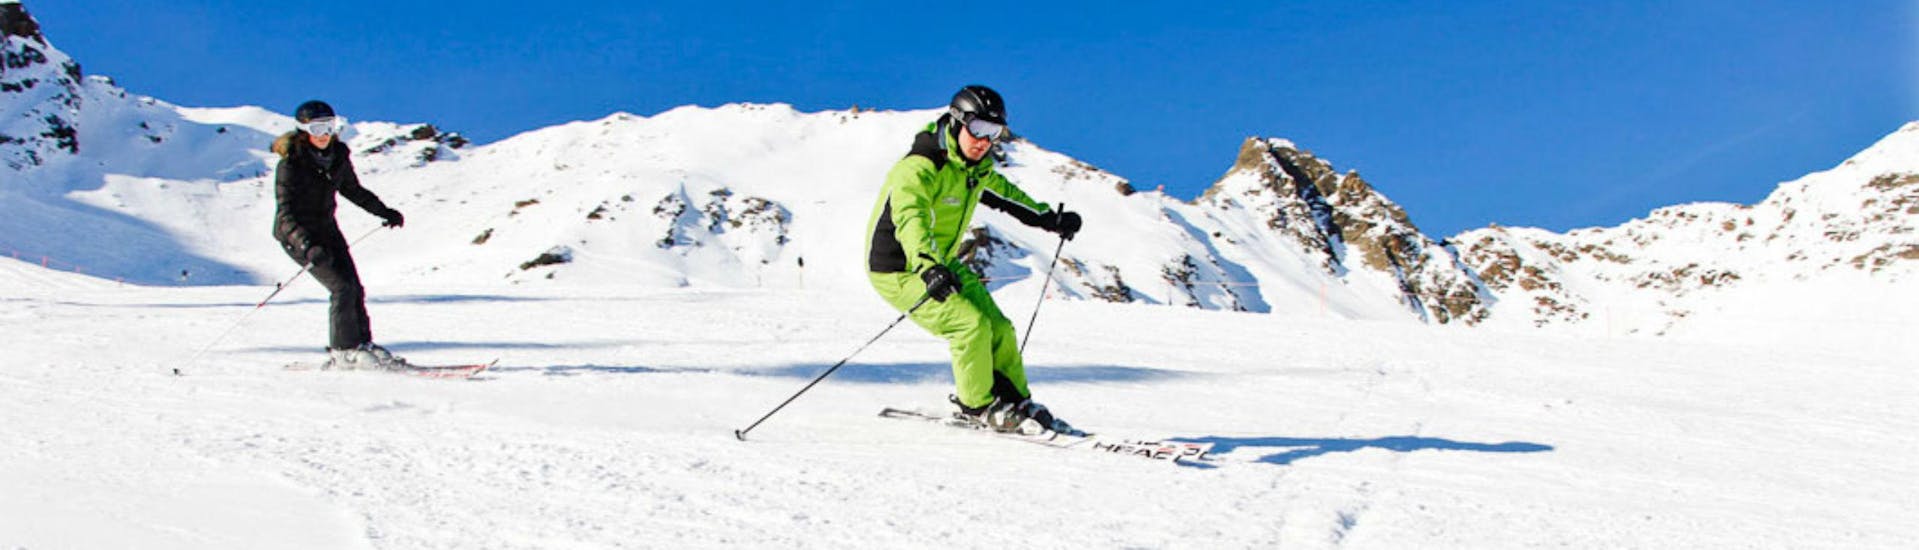 A female skier is following her ski instructor from the ski school Ski- und Bikeschule Ötztal Sölden during her Private Ski Lessons for Kids & Adults - All Levels.